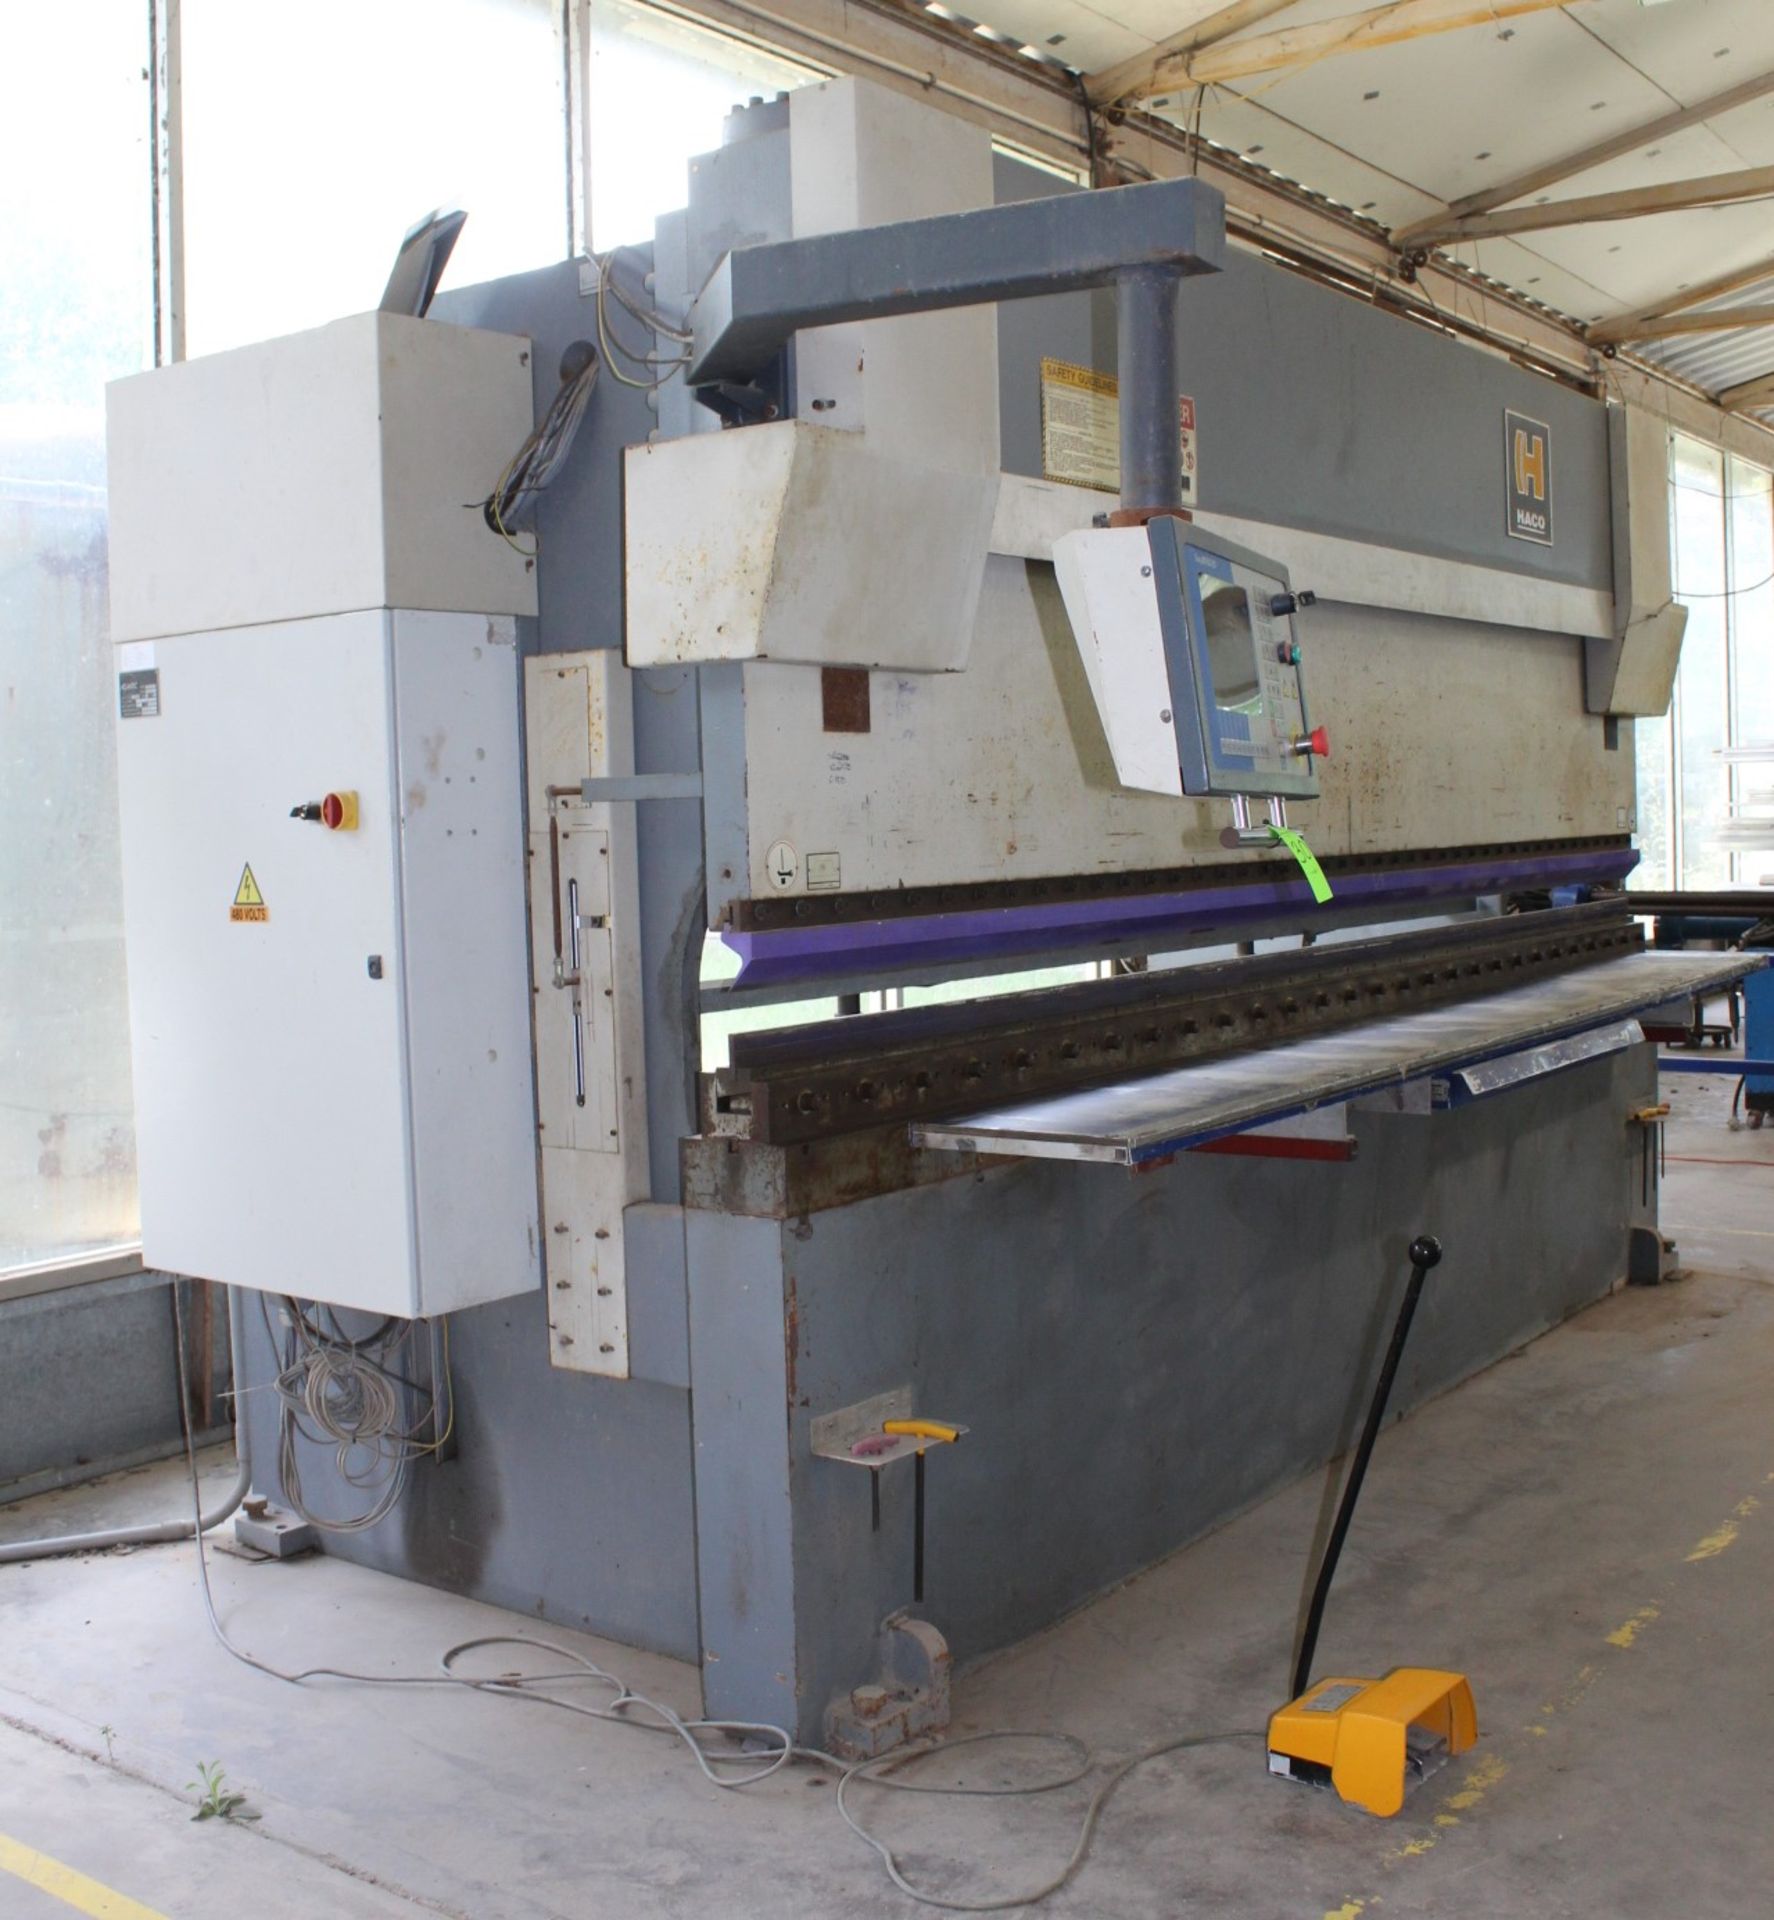 Atlantic Haco SRM200-14 CNC Press Brake w/2021 Upgrade. With EasyBEND-2D Control Panel, S/N 82058 - Image 2 of 10